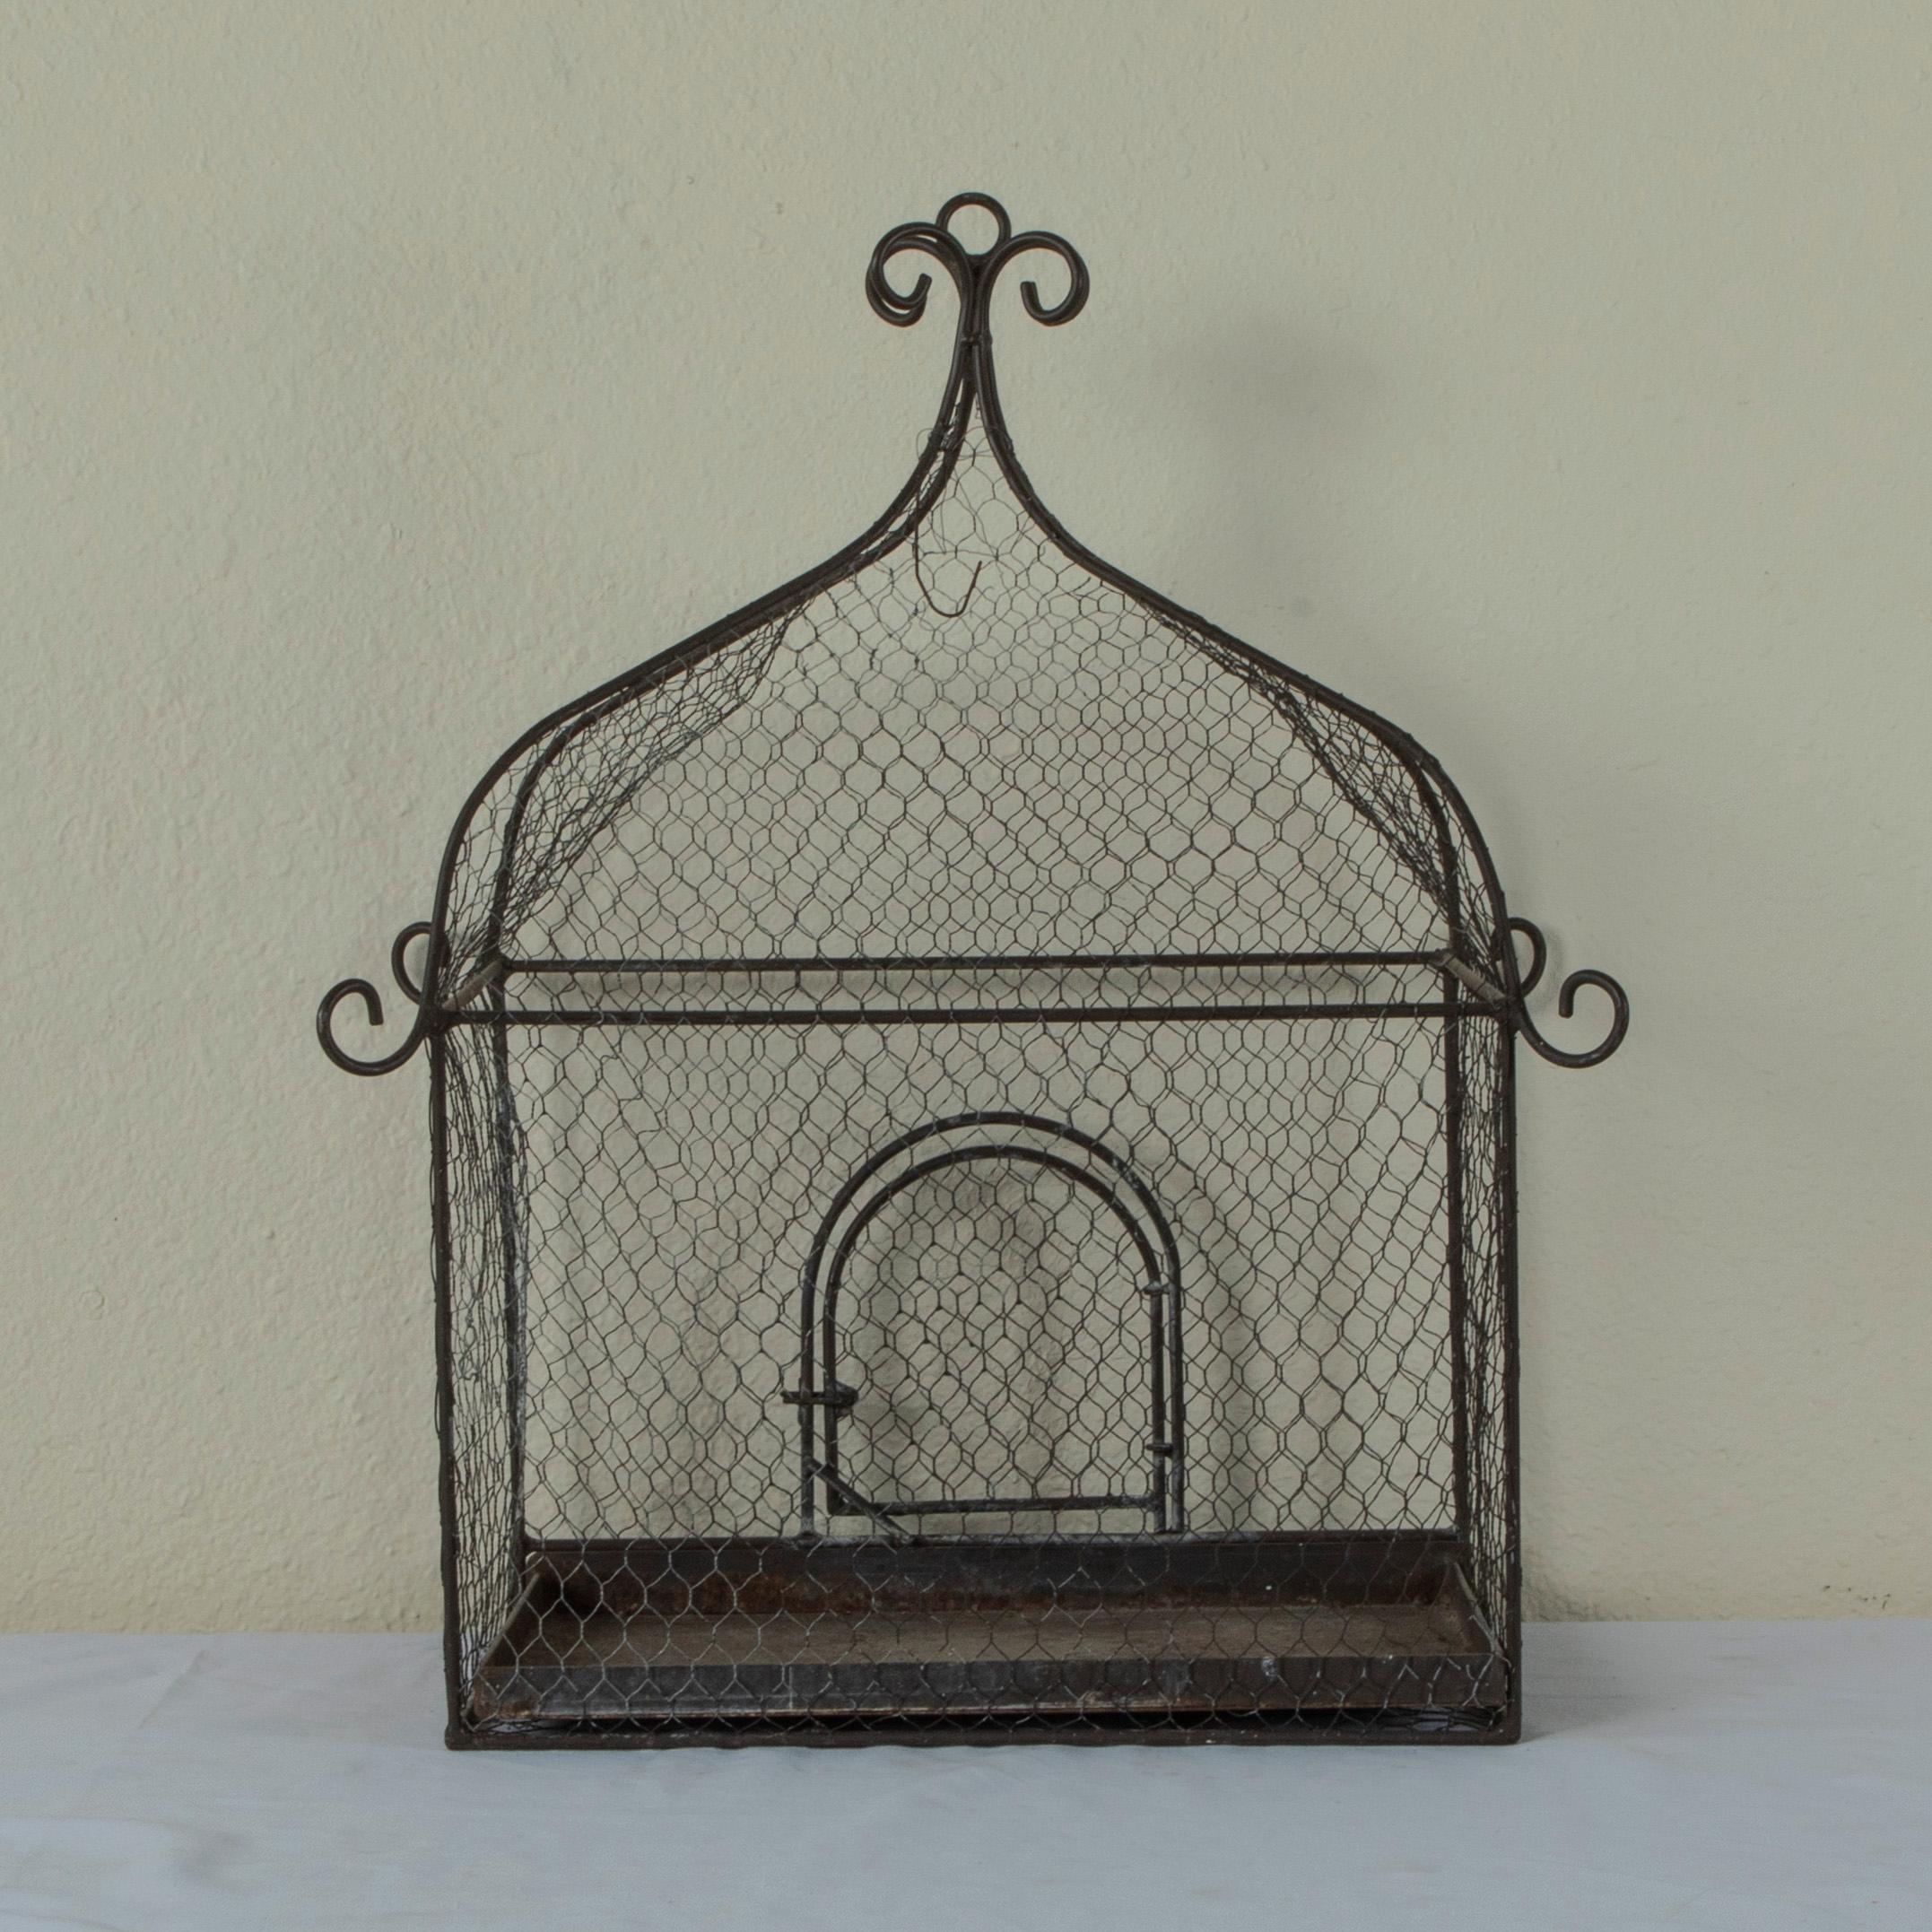 Mid-20th Century French Iron and Wire Bird Cage with Pullout Tray For Sale 1